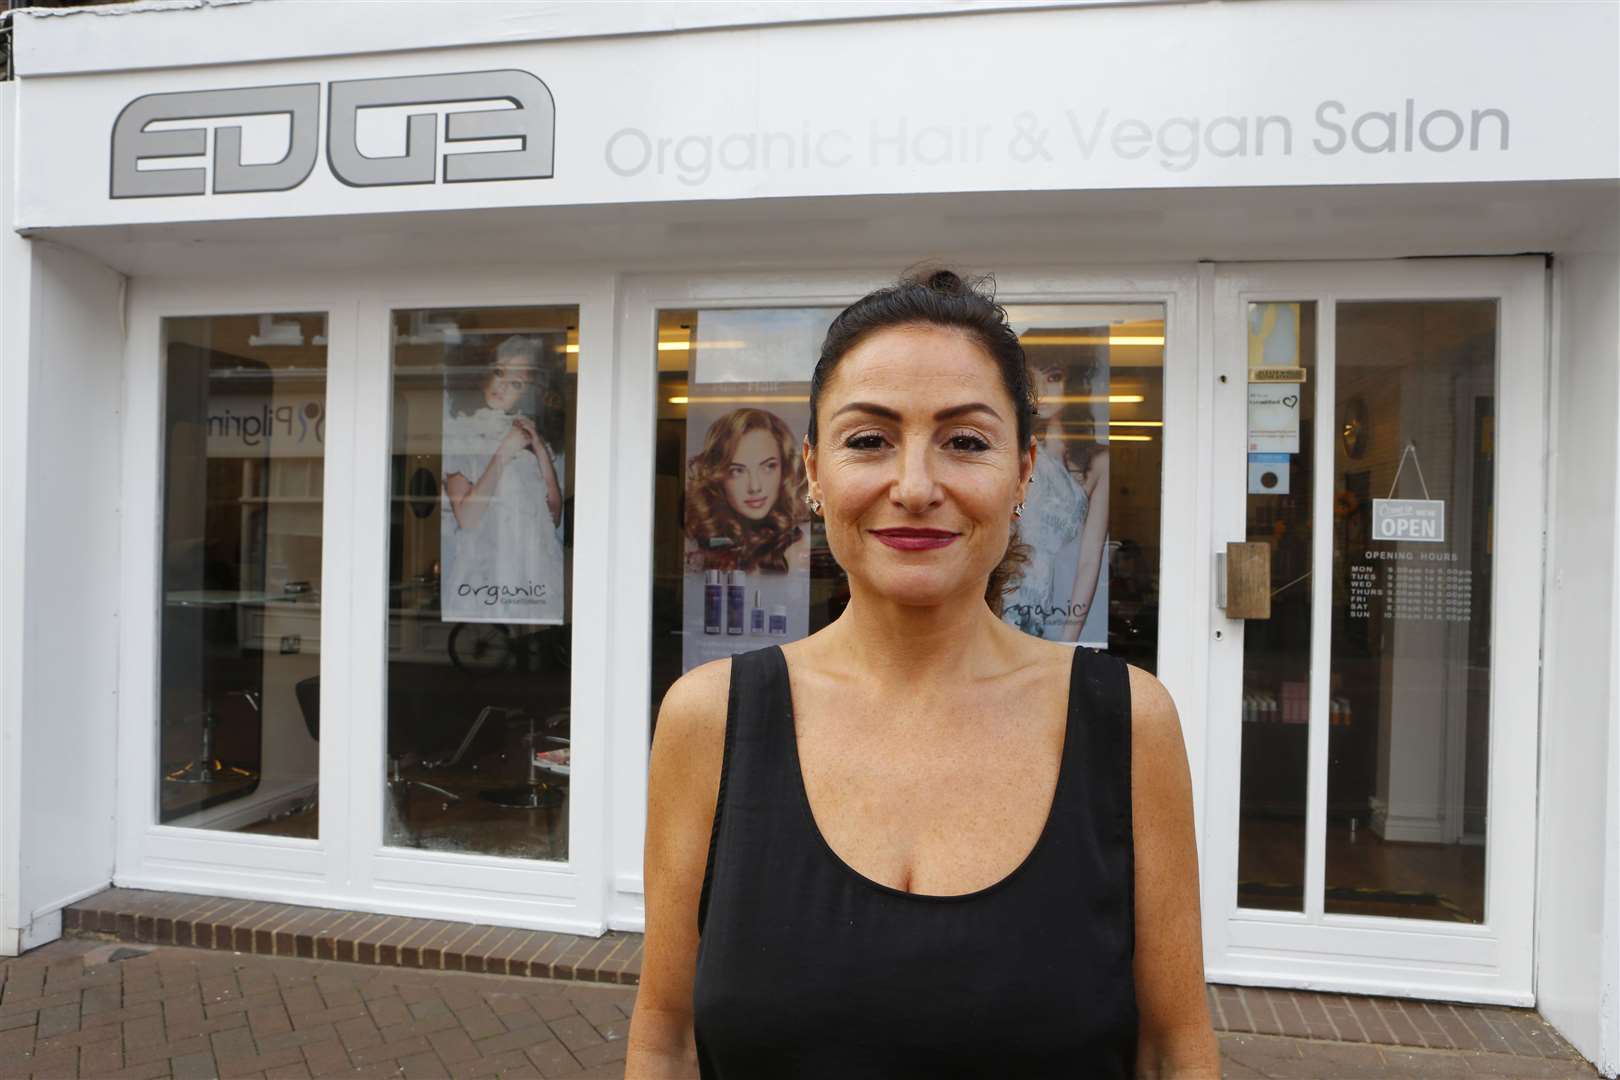 Janet Maria Clare has opened a vegan salon in Ashford town centre. Picture: Andy Jones